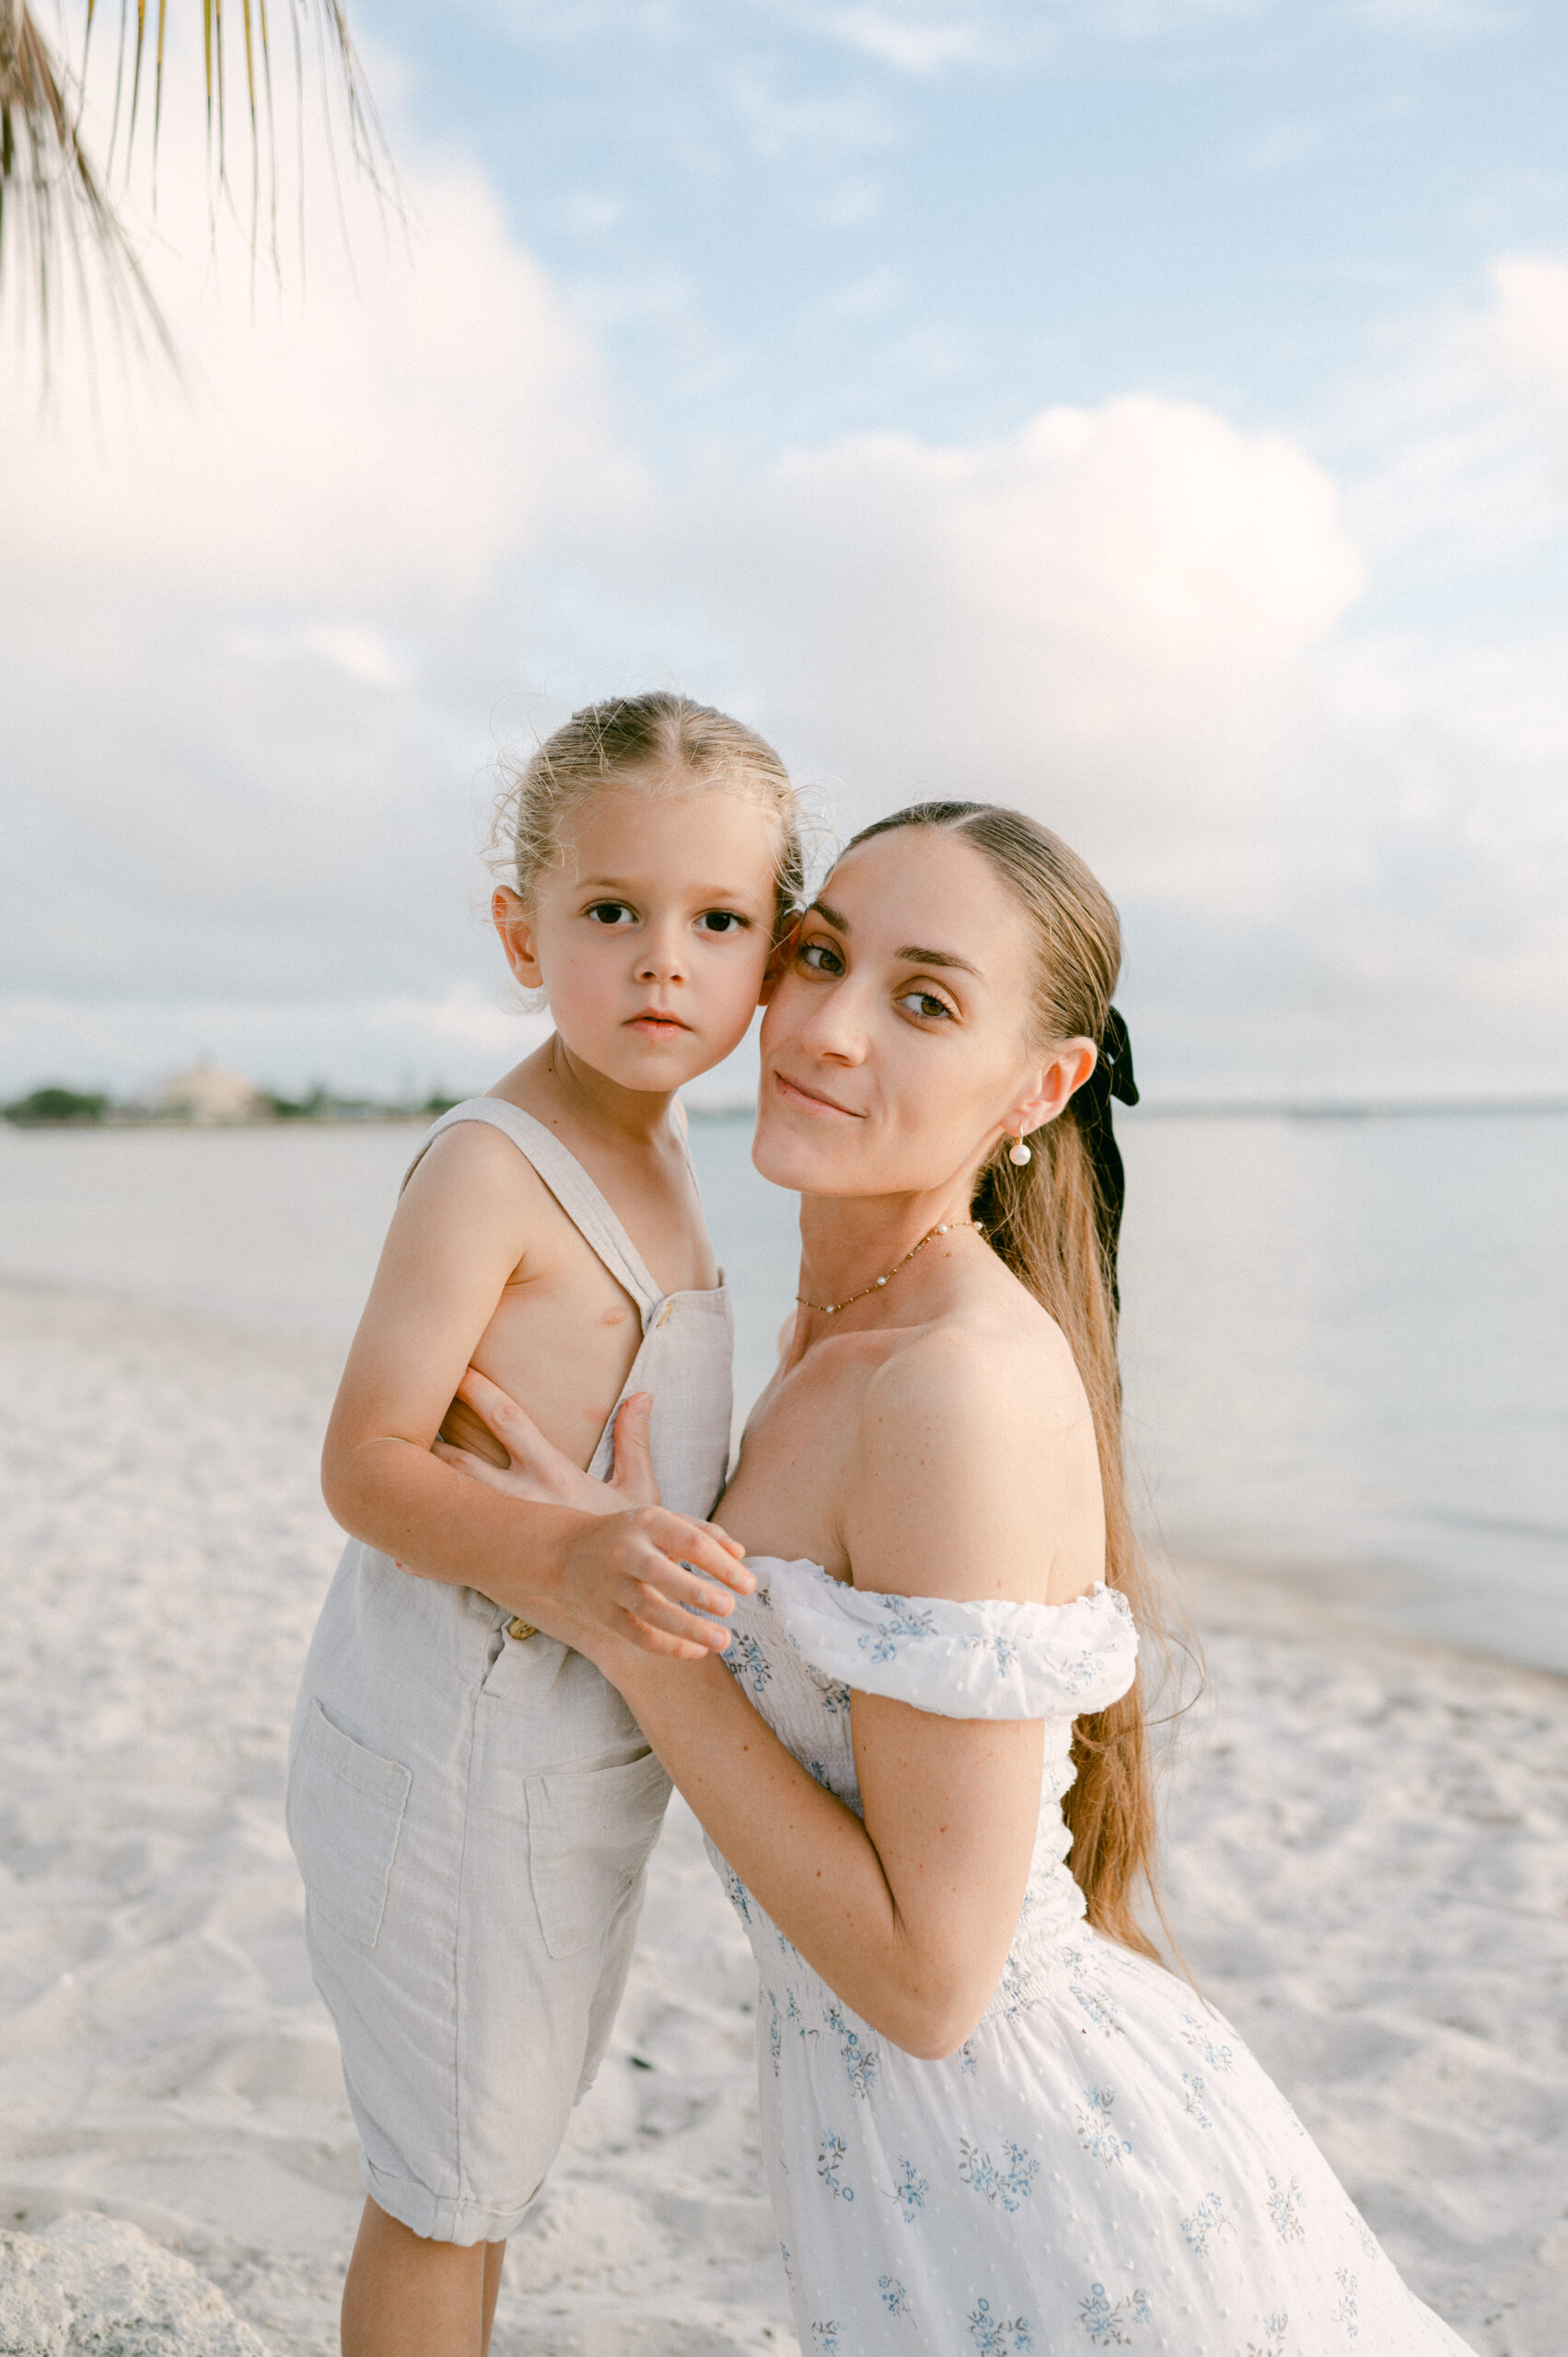 Mommy and son in Key Biscayne beach